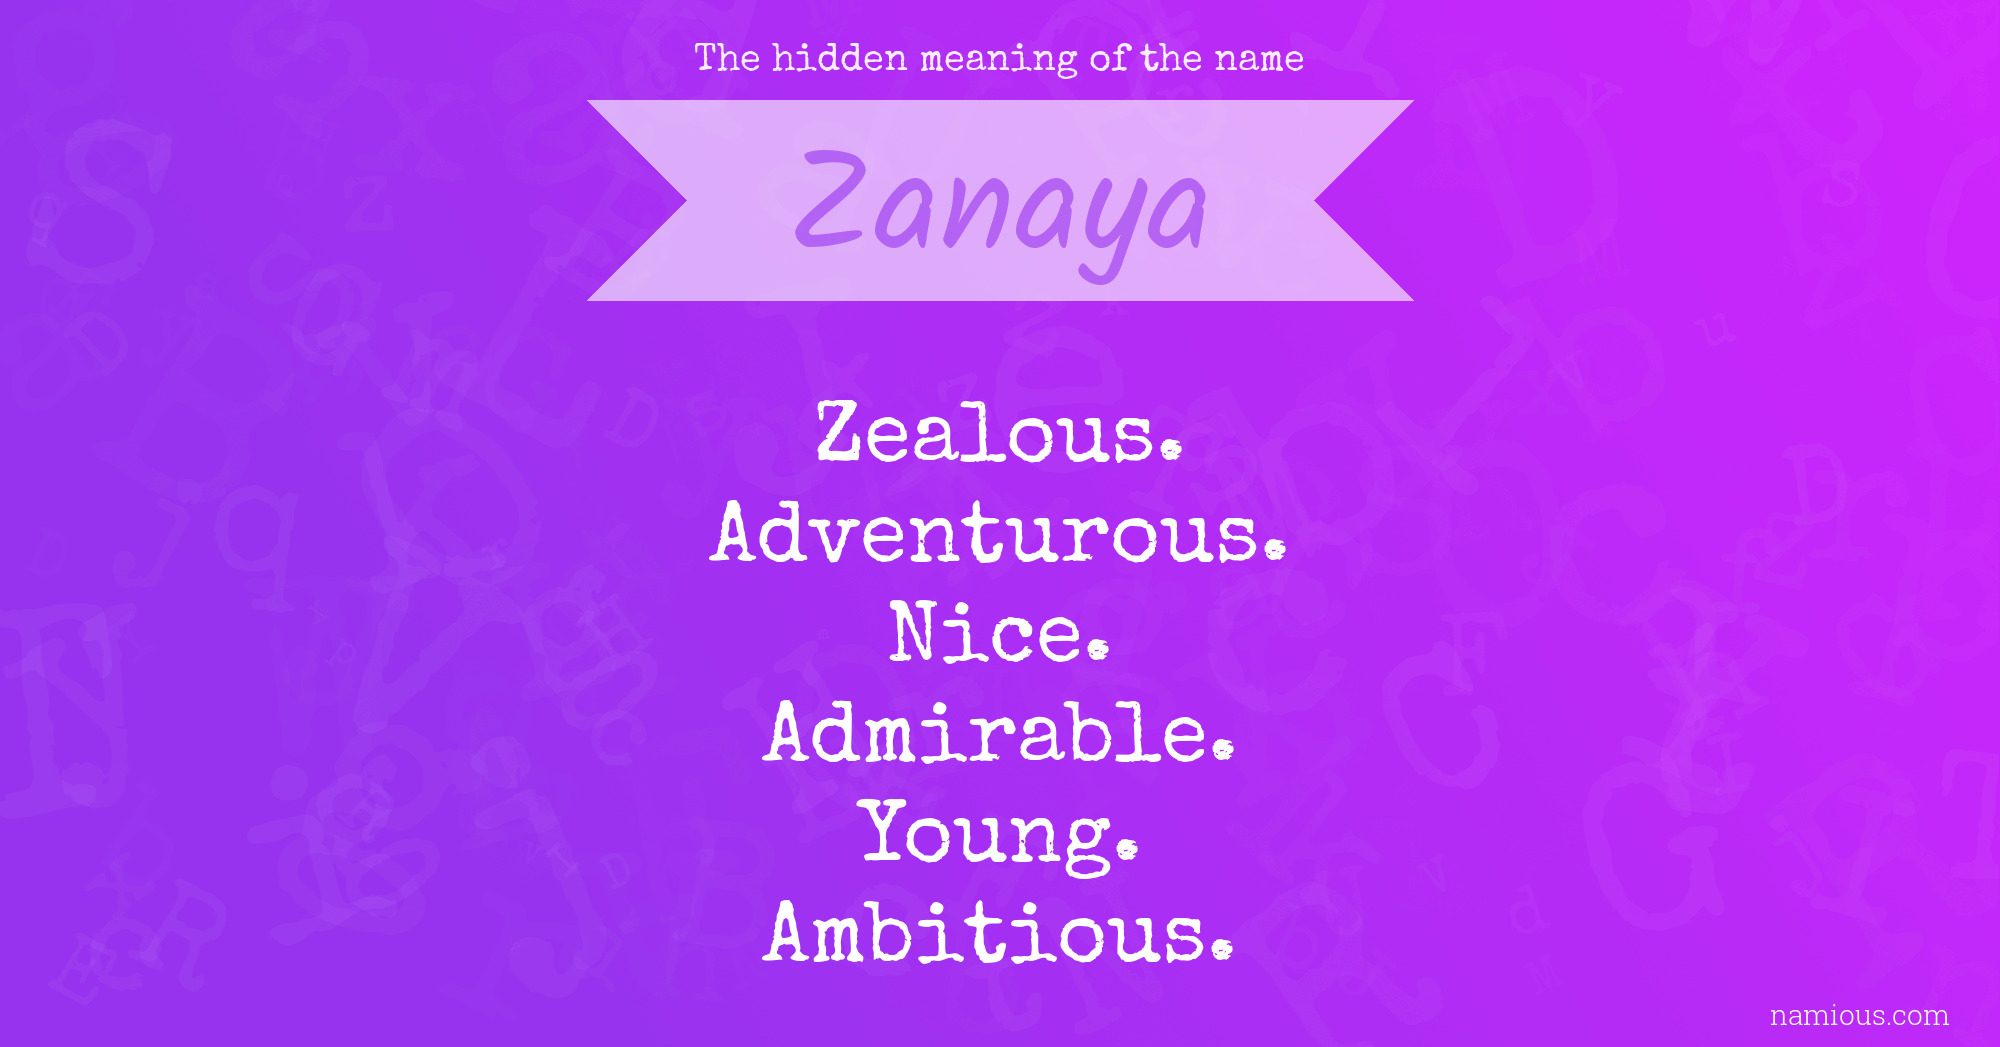 The hidden meaning of the name Zanaya